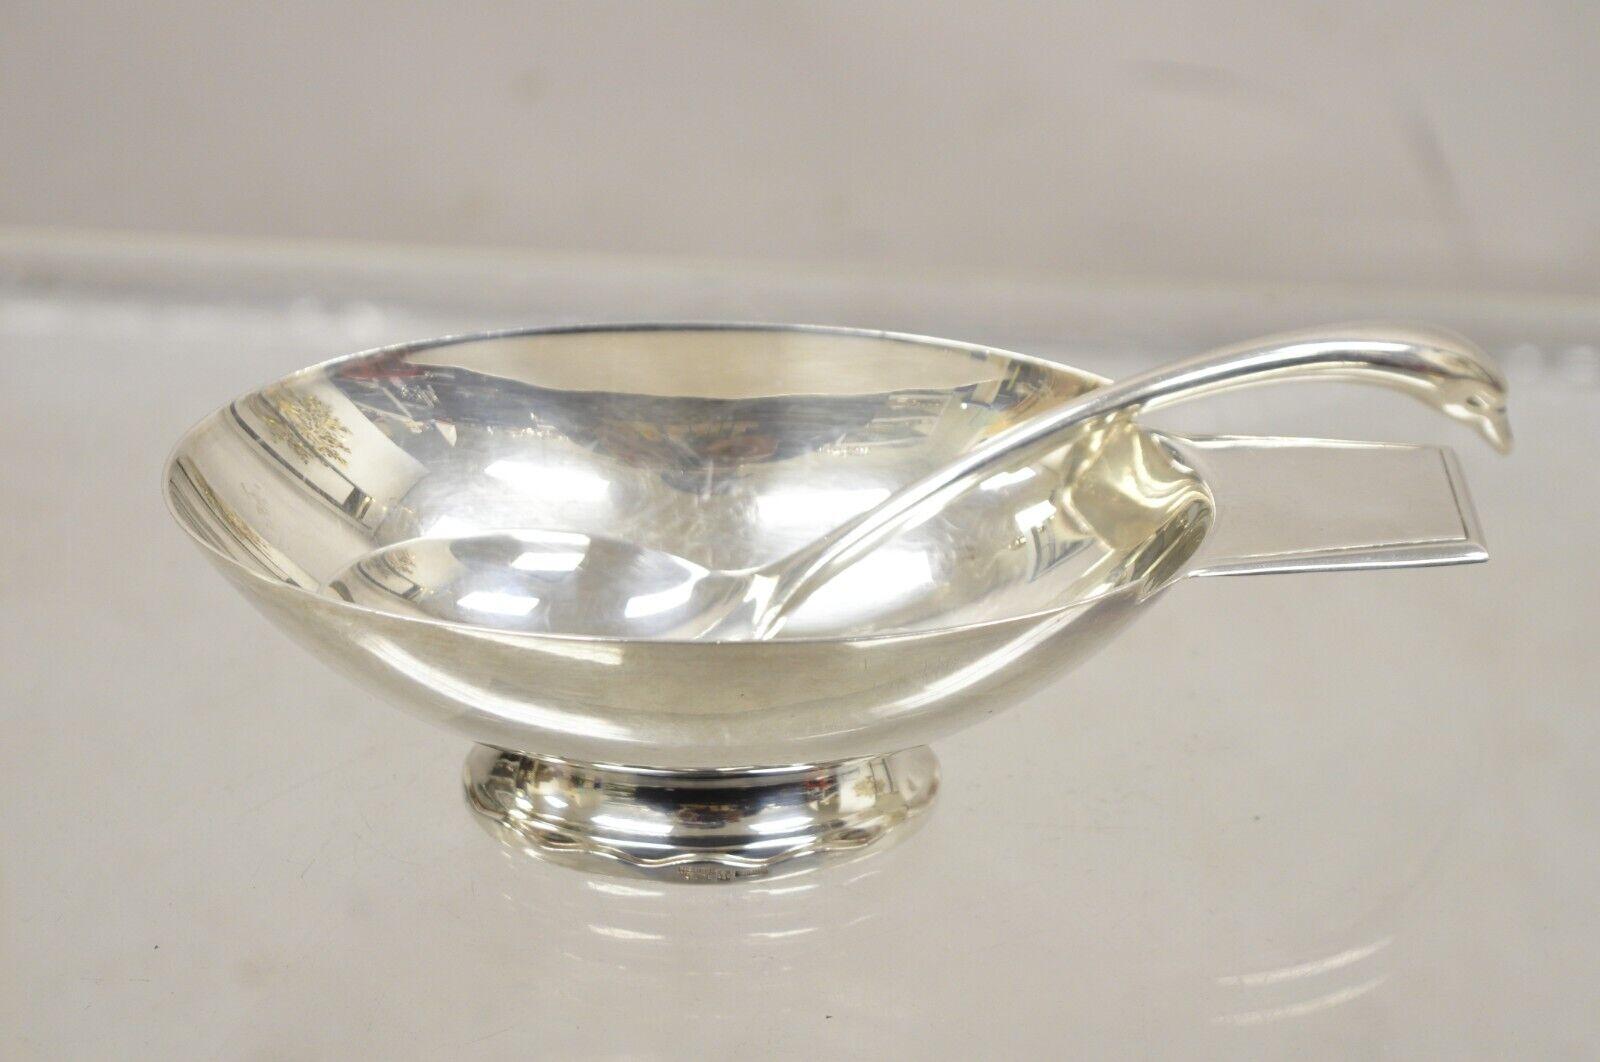 Vintage Christofle France Gallia Silver Plated Figural Gravy Sauce Boat with Swan Spoon Ladle. Circa Mid 20th Century. Measurements: Sauce Boat: 2.5